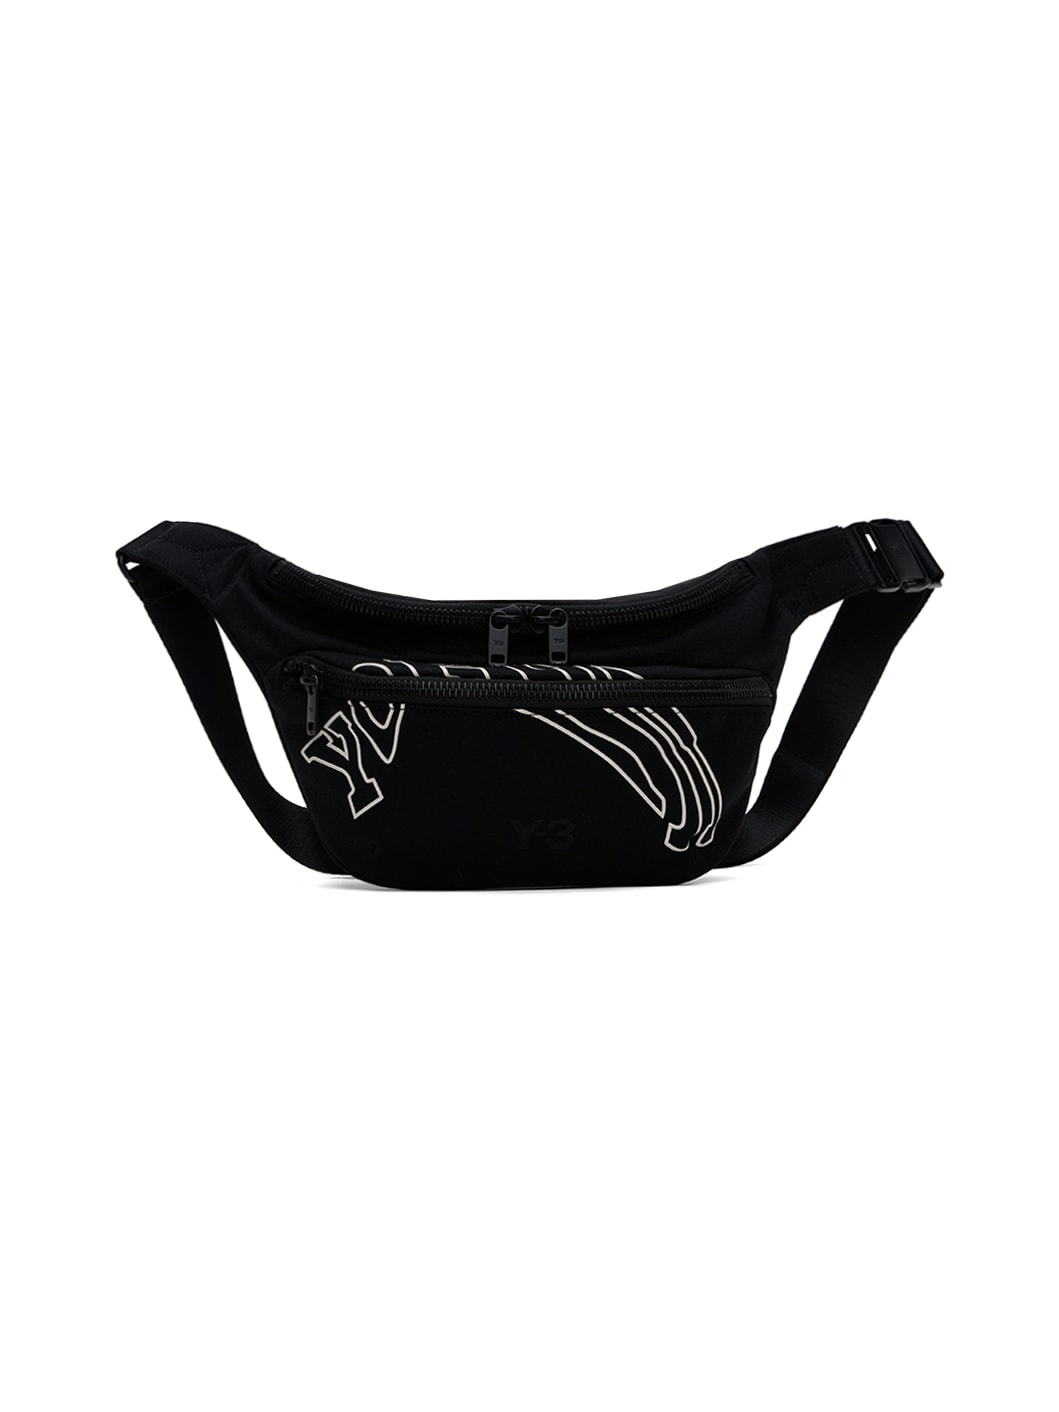 Black Morphed Pouch - 1